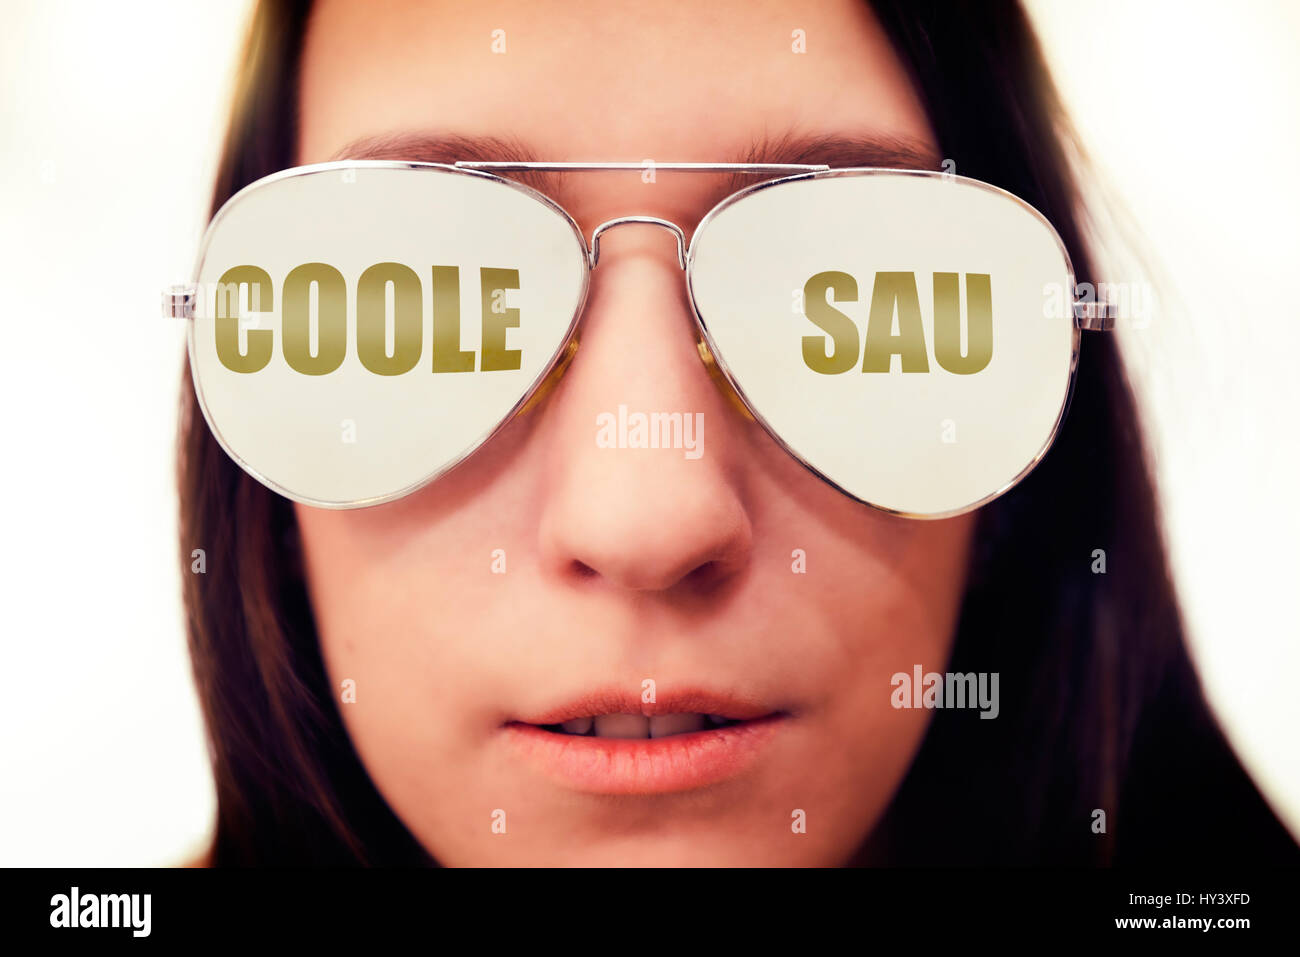 Woman with reflecting glasses, label cool sow, Frau mit Spiegelbrille, Aufschrift Coole Sau Stock Photo